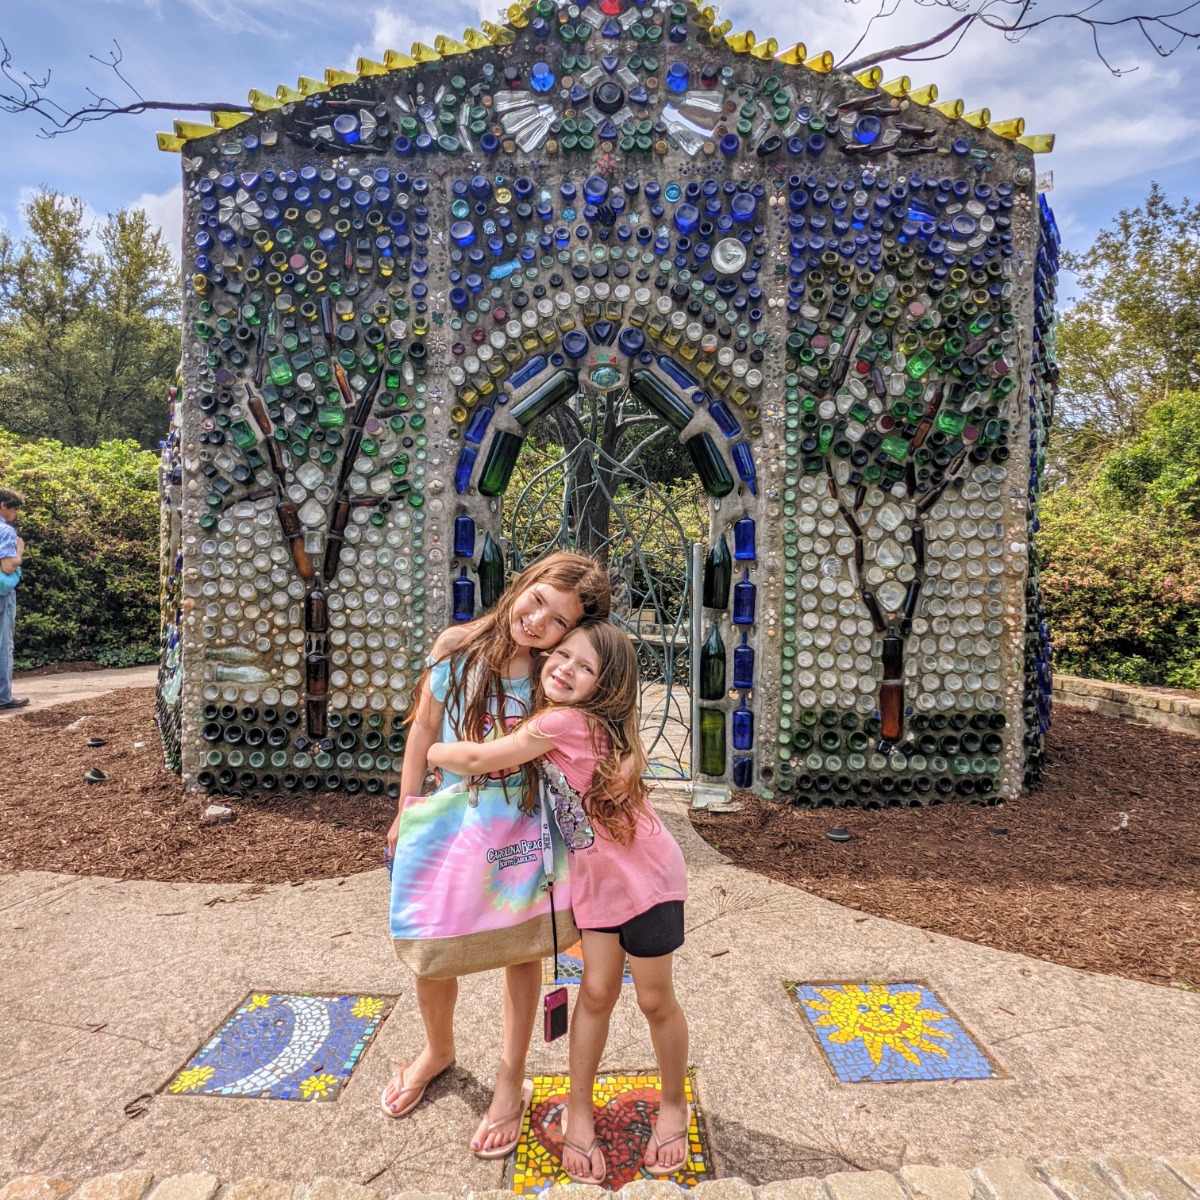 Sweet sisters enjoying the Bottle Chapel at Airlie Gardens in North Carolina